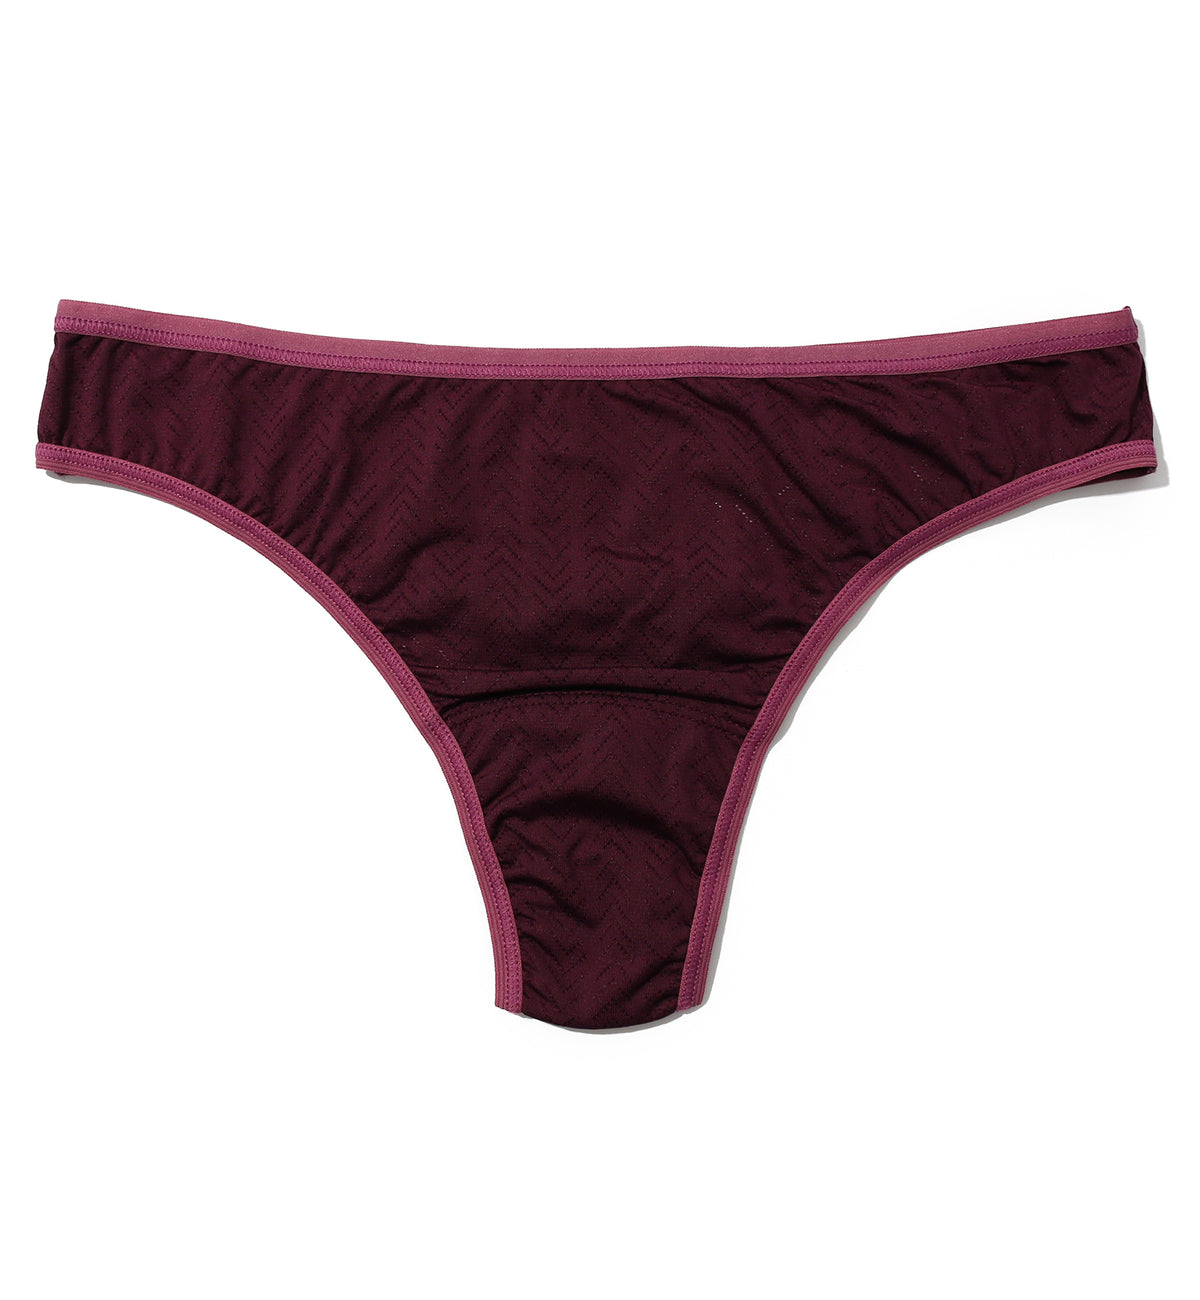 Hanky Panky MoveCalm Natural Rise Thong (2P1664),XS,Dried Cherry/Damson Plum - Dried Cherry/Damson Plum,XS